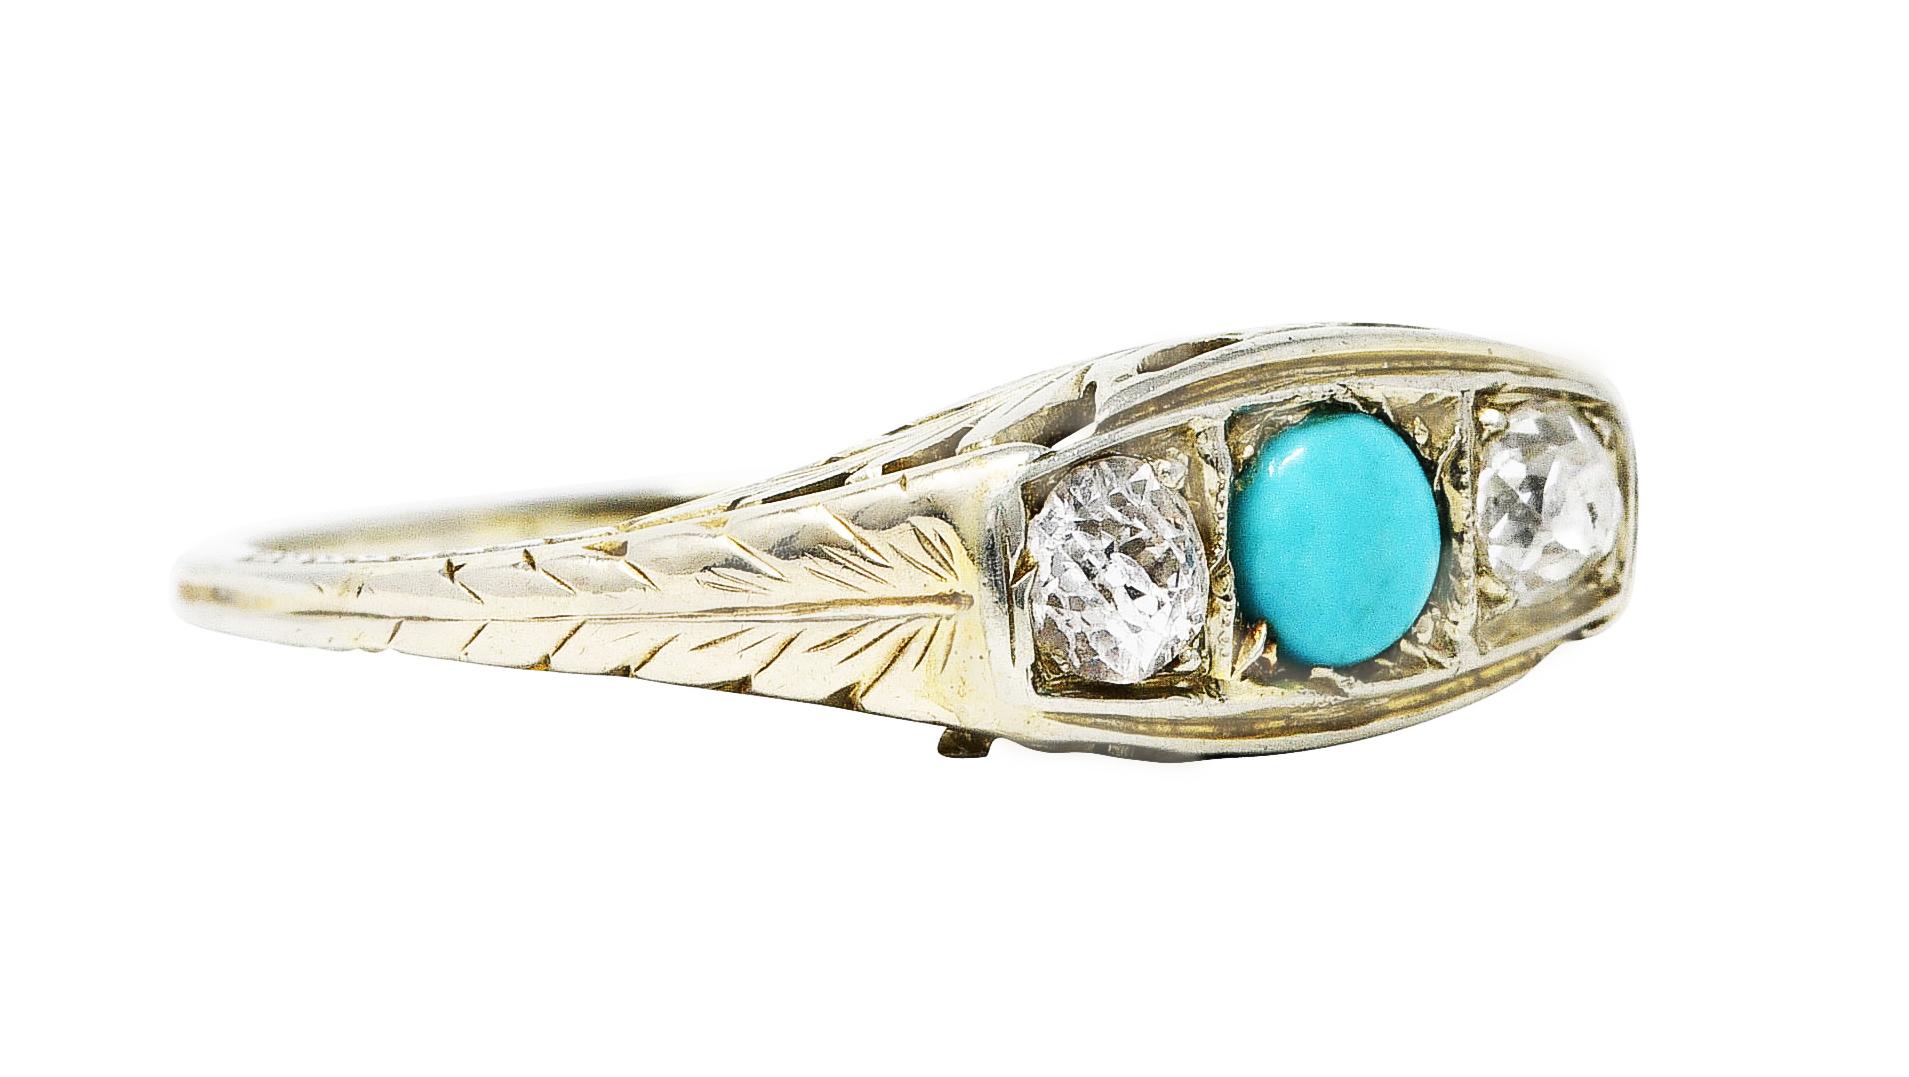 Three stone ring designed with bead setting and engraving

Centering a 4.0 mm round cabochon turquoise - opaque and very saturated robin's egg blue 

Flanked by two old European cut diamonds weighing approximately 0.30 carats in total 

Diamonds are